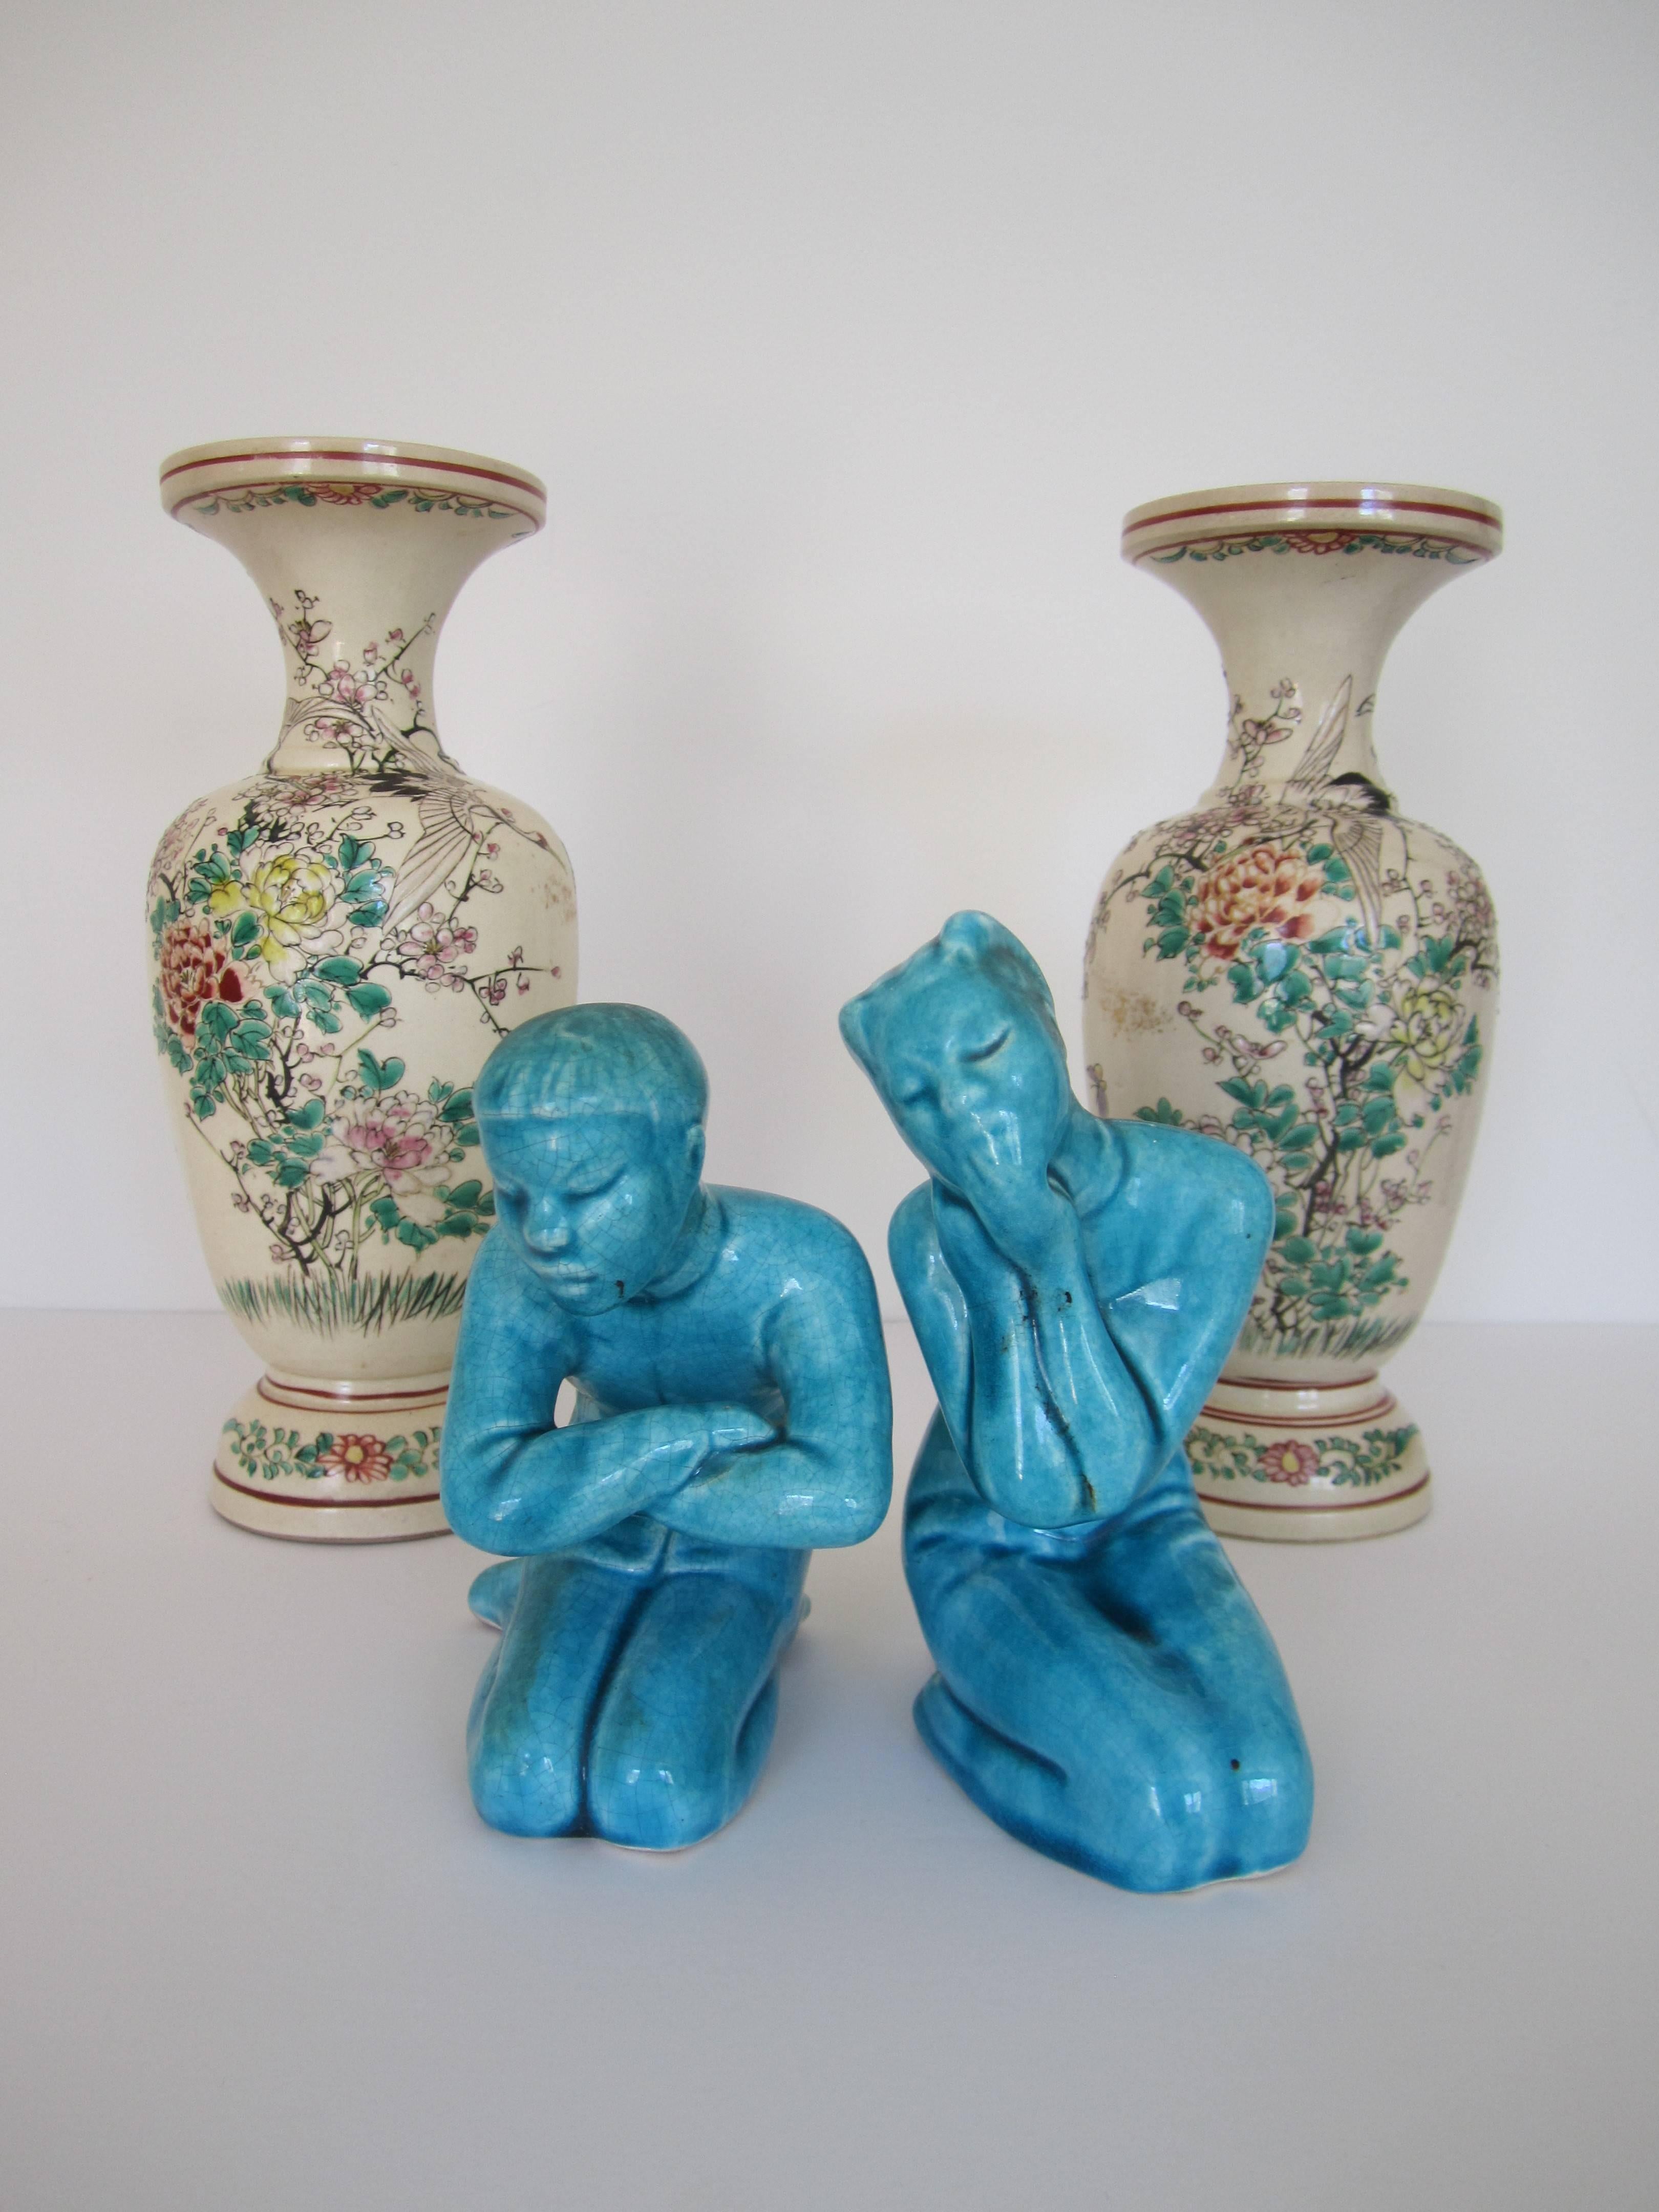 Japanese Earthenware Vases with Birds and Butterflies, Pair  In Good Condition For Sale In New York, NY